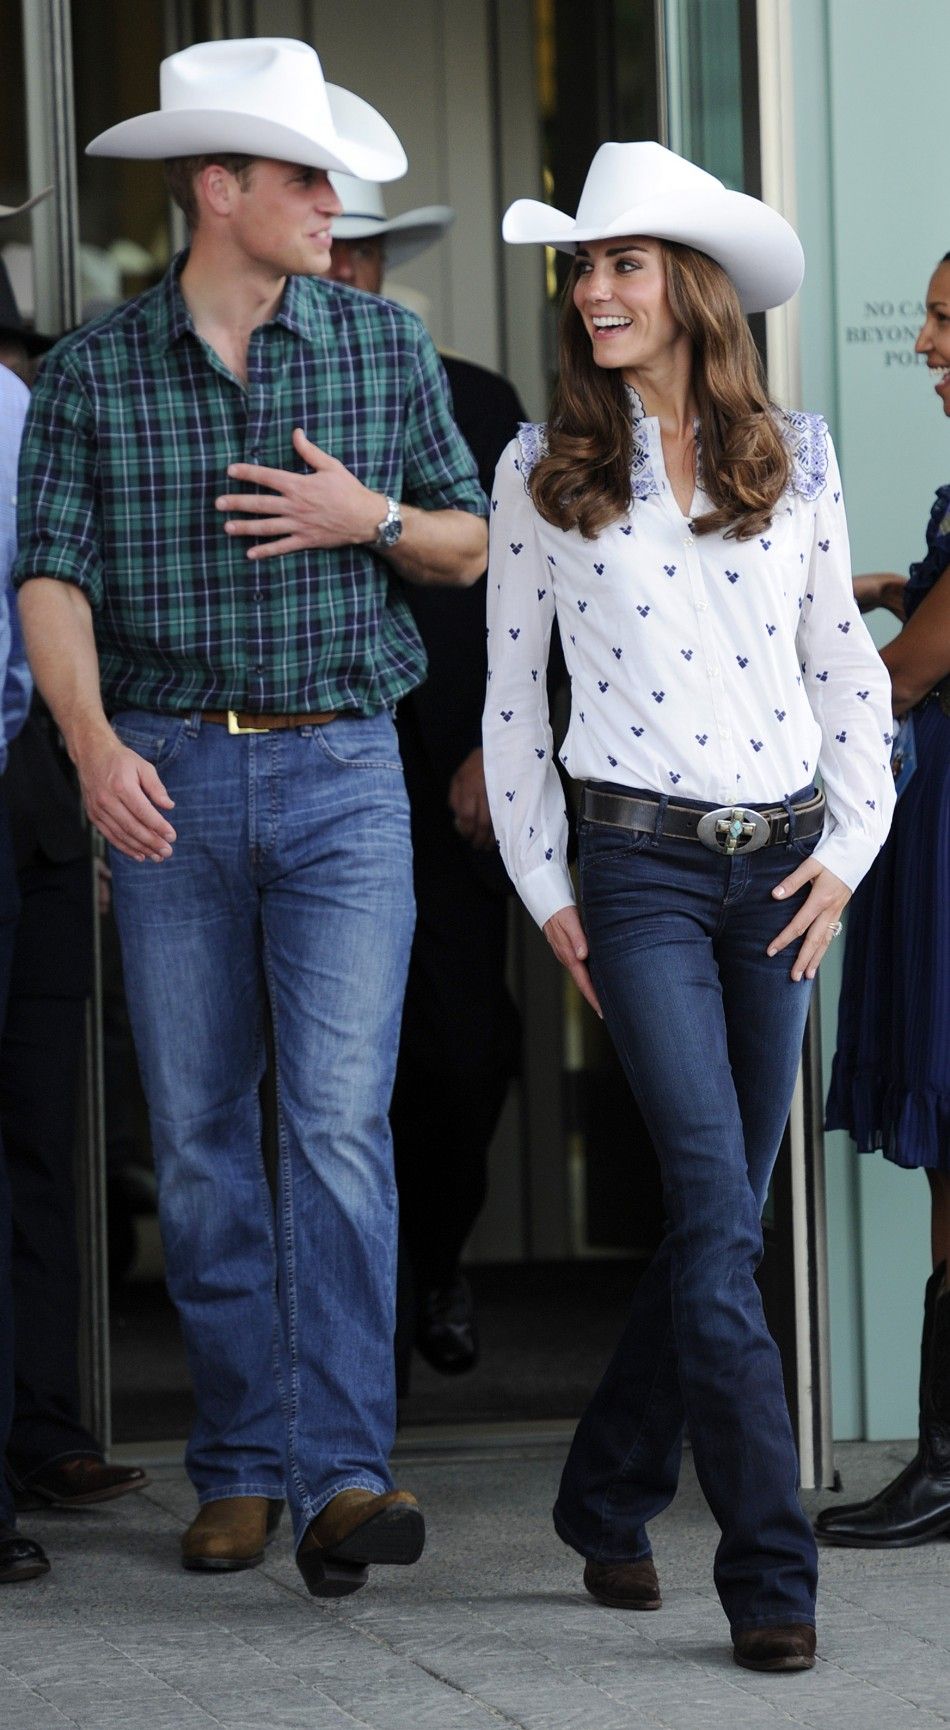 Britains Prince William and his wife Catherine, Duchess of Cambridge, depart the Calgary Stampede in Calgary.